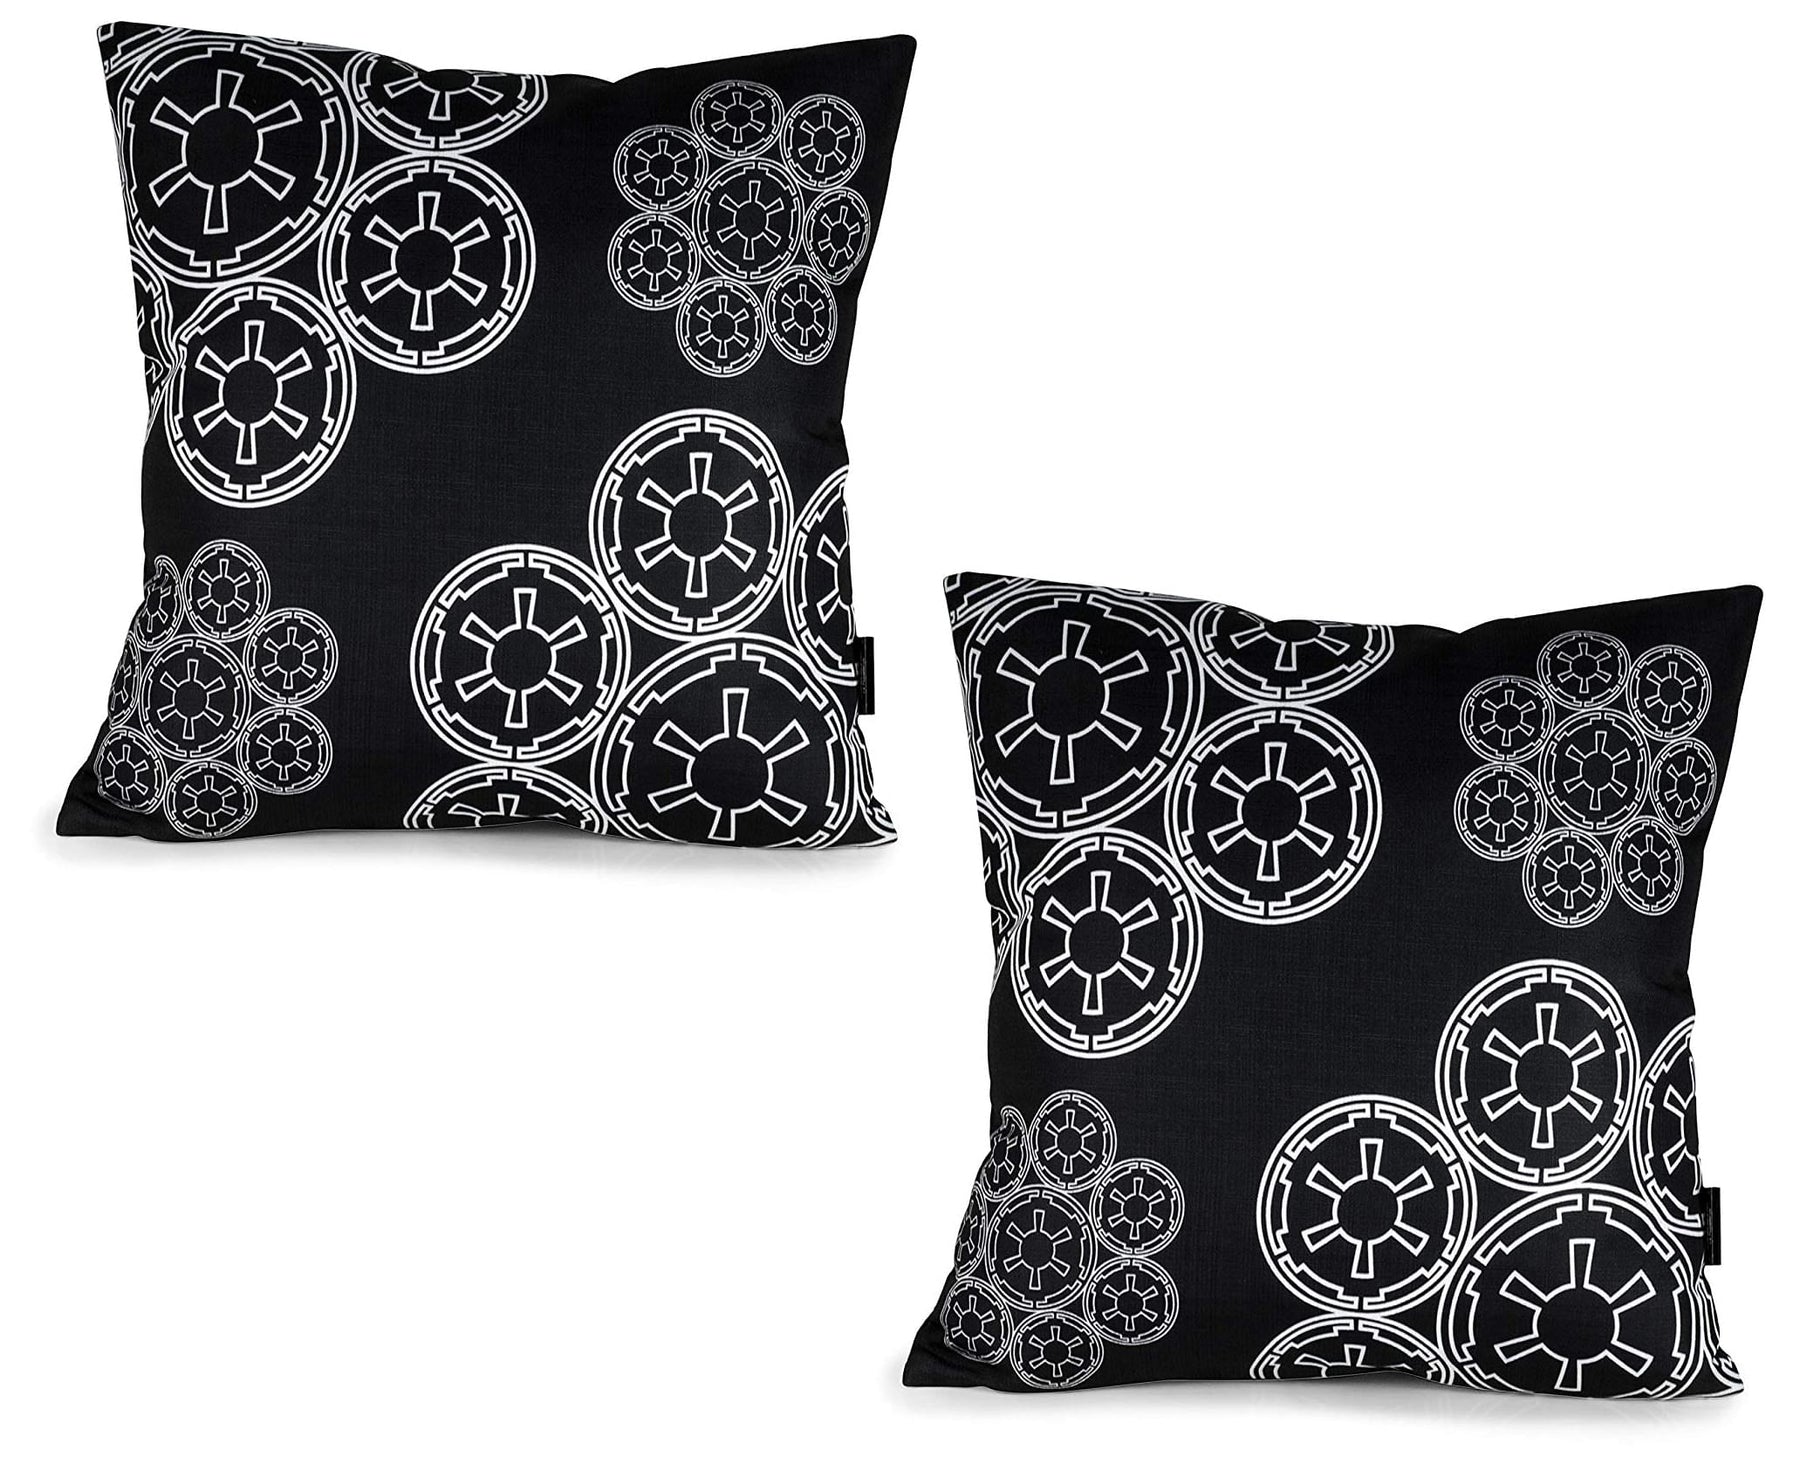 Star Wars Black Throw Pillow | White Imperial Logo | 20 x 20 Inches | Set of 2